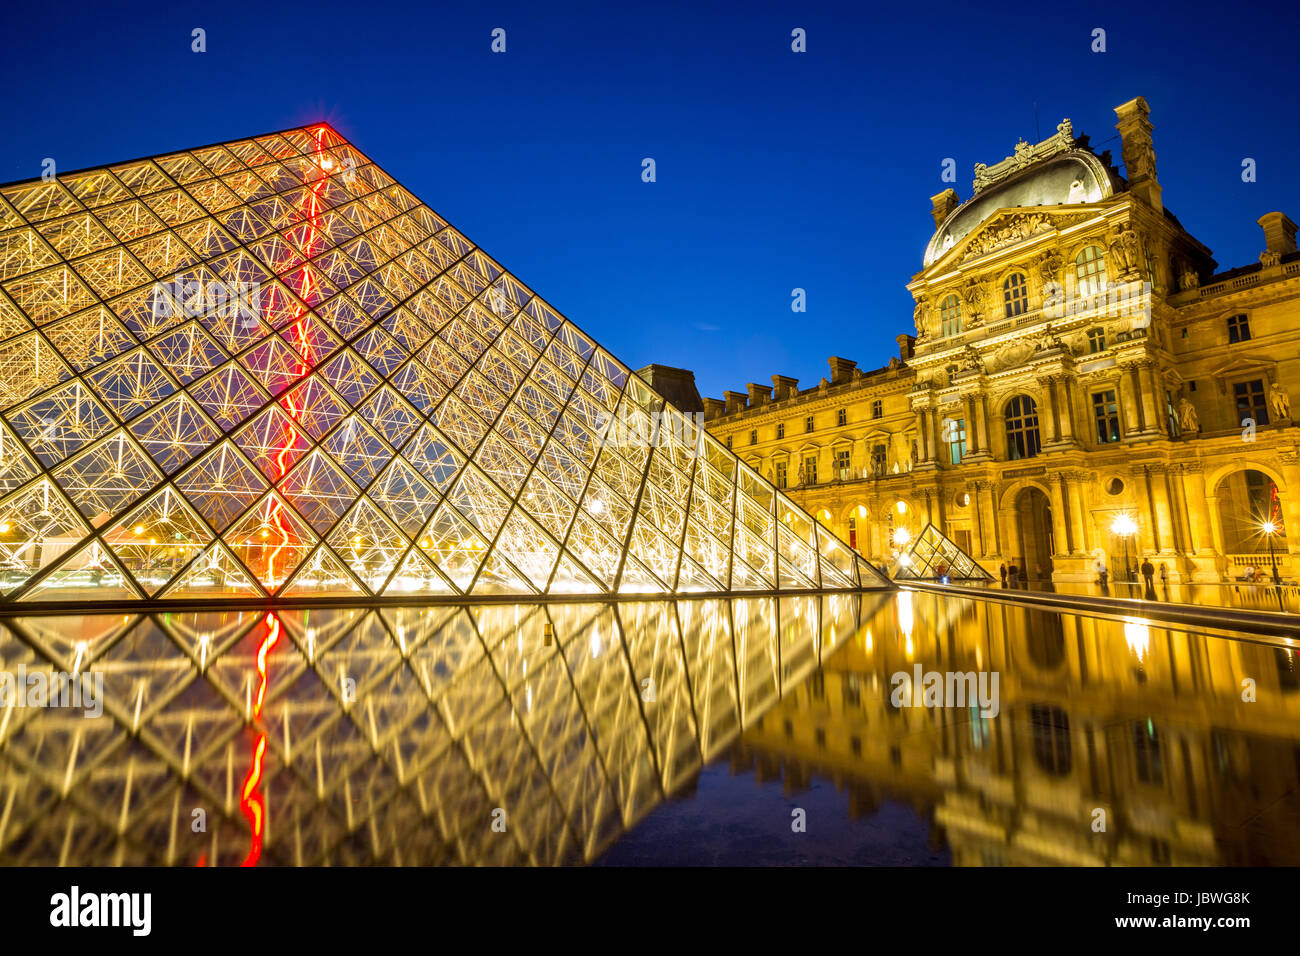 Paris - June 18: Louvre museum at dusk on June 18, 2014 in Paris. This is one of the most popular tourist destinations in France displayed over 60,000 square meters of exhibition space.. Stock Photo